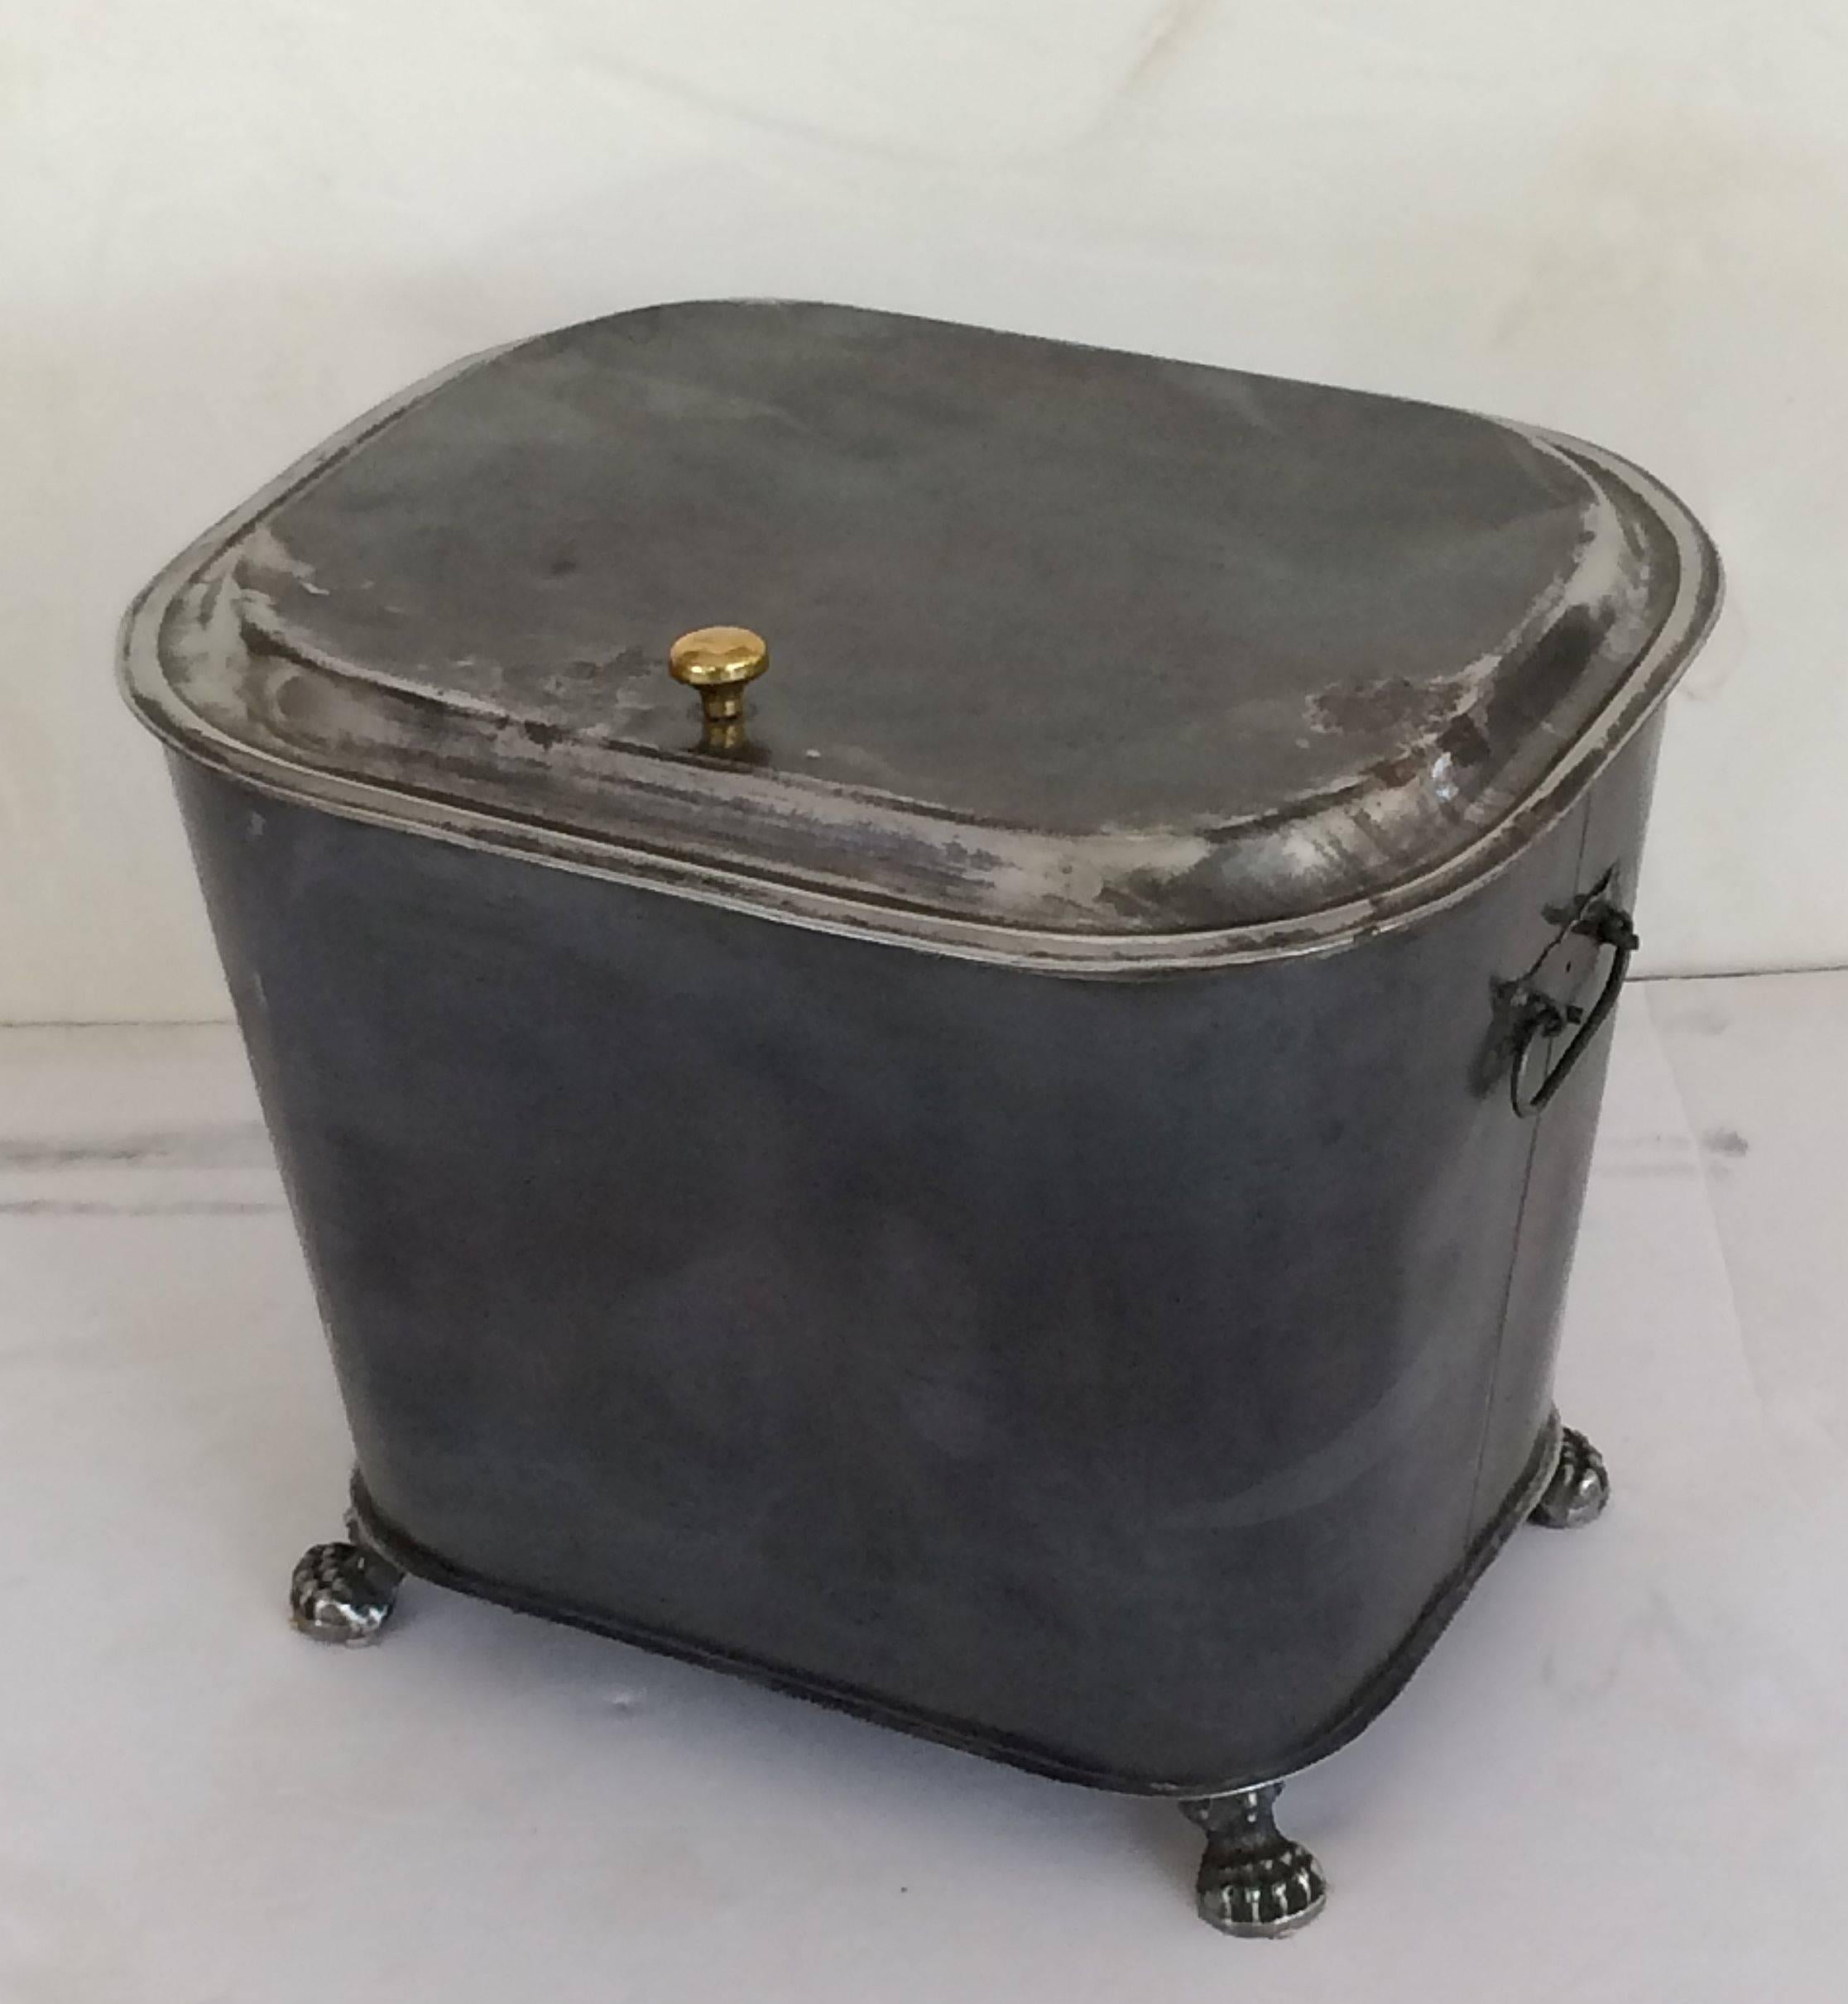 A fine English burnished steel bin with moulded hinged lid and brass pull, opposing handles, and resting on claw feet.

Its large size is great for a variety of storage.